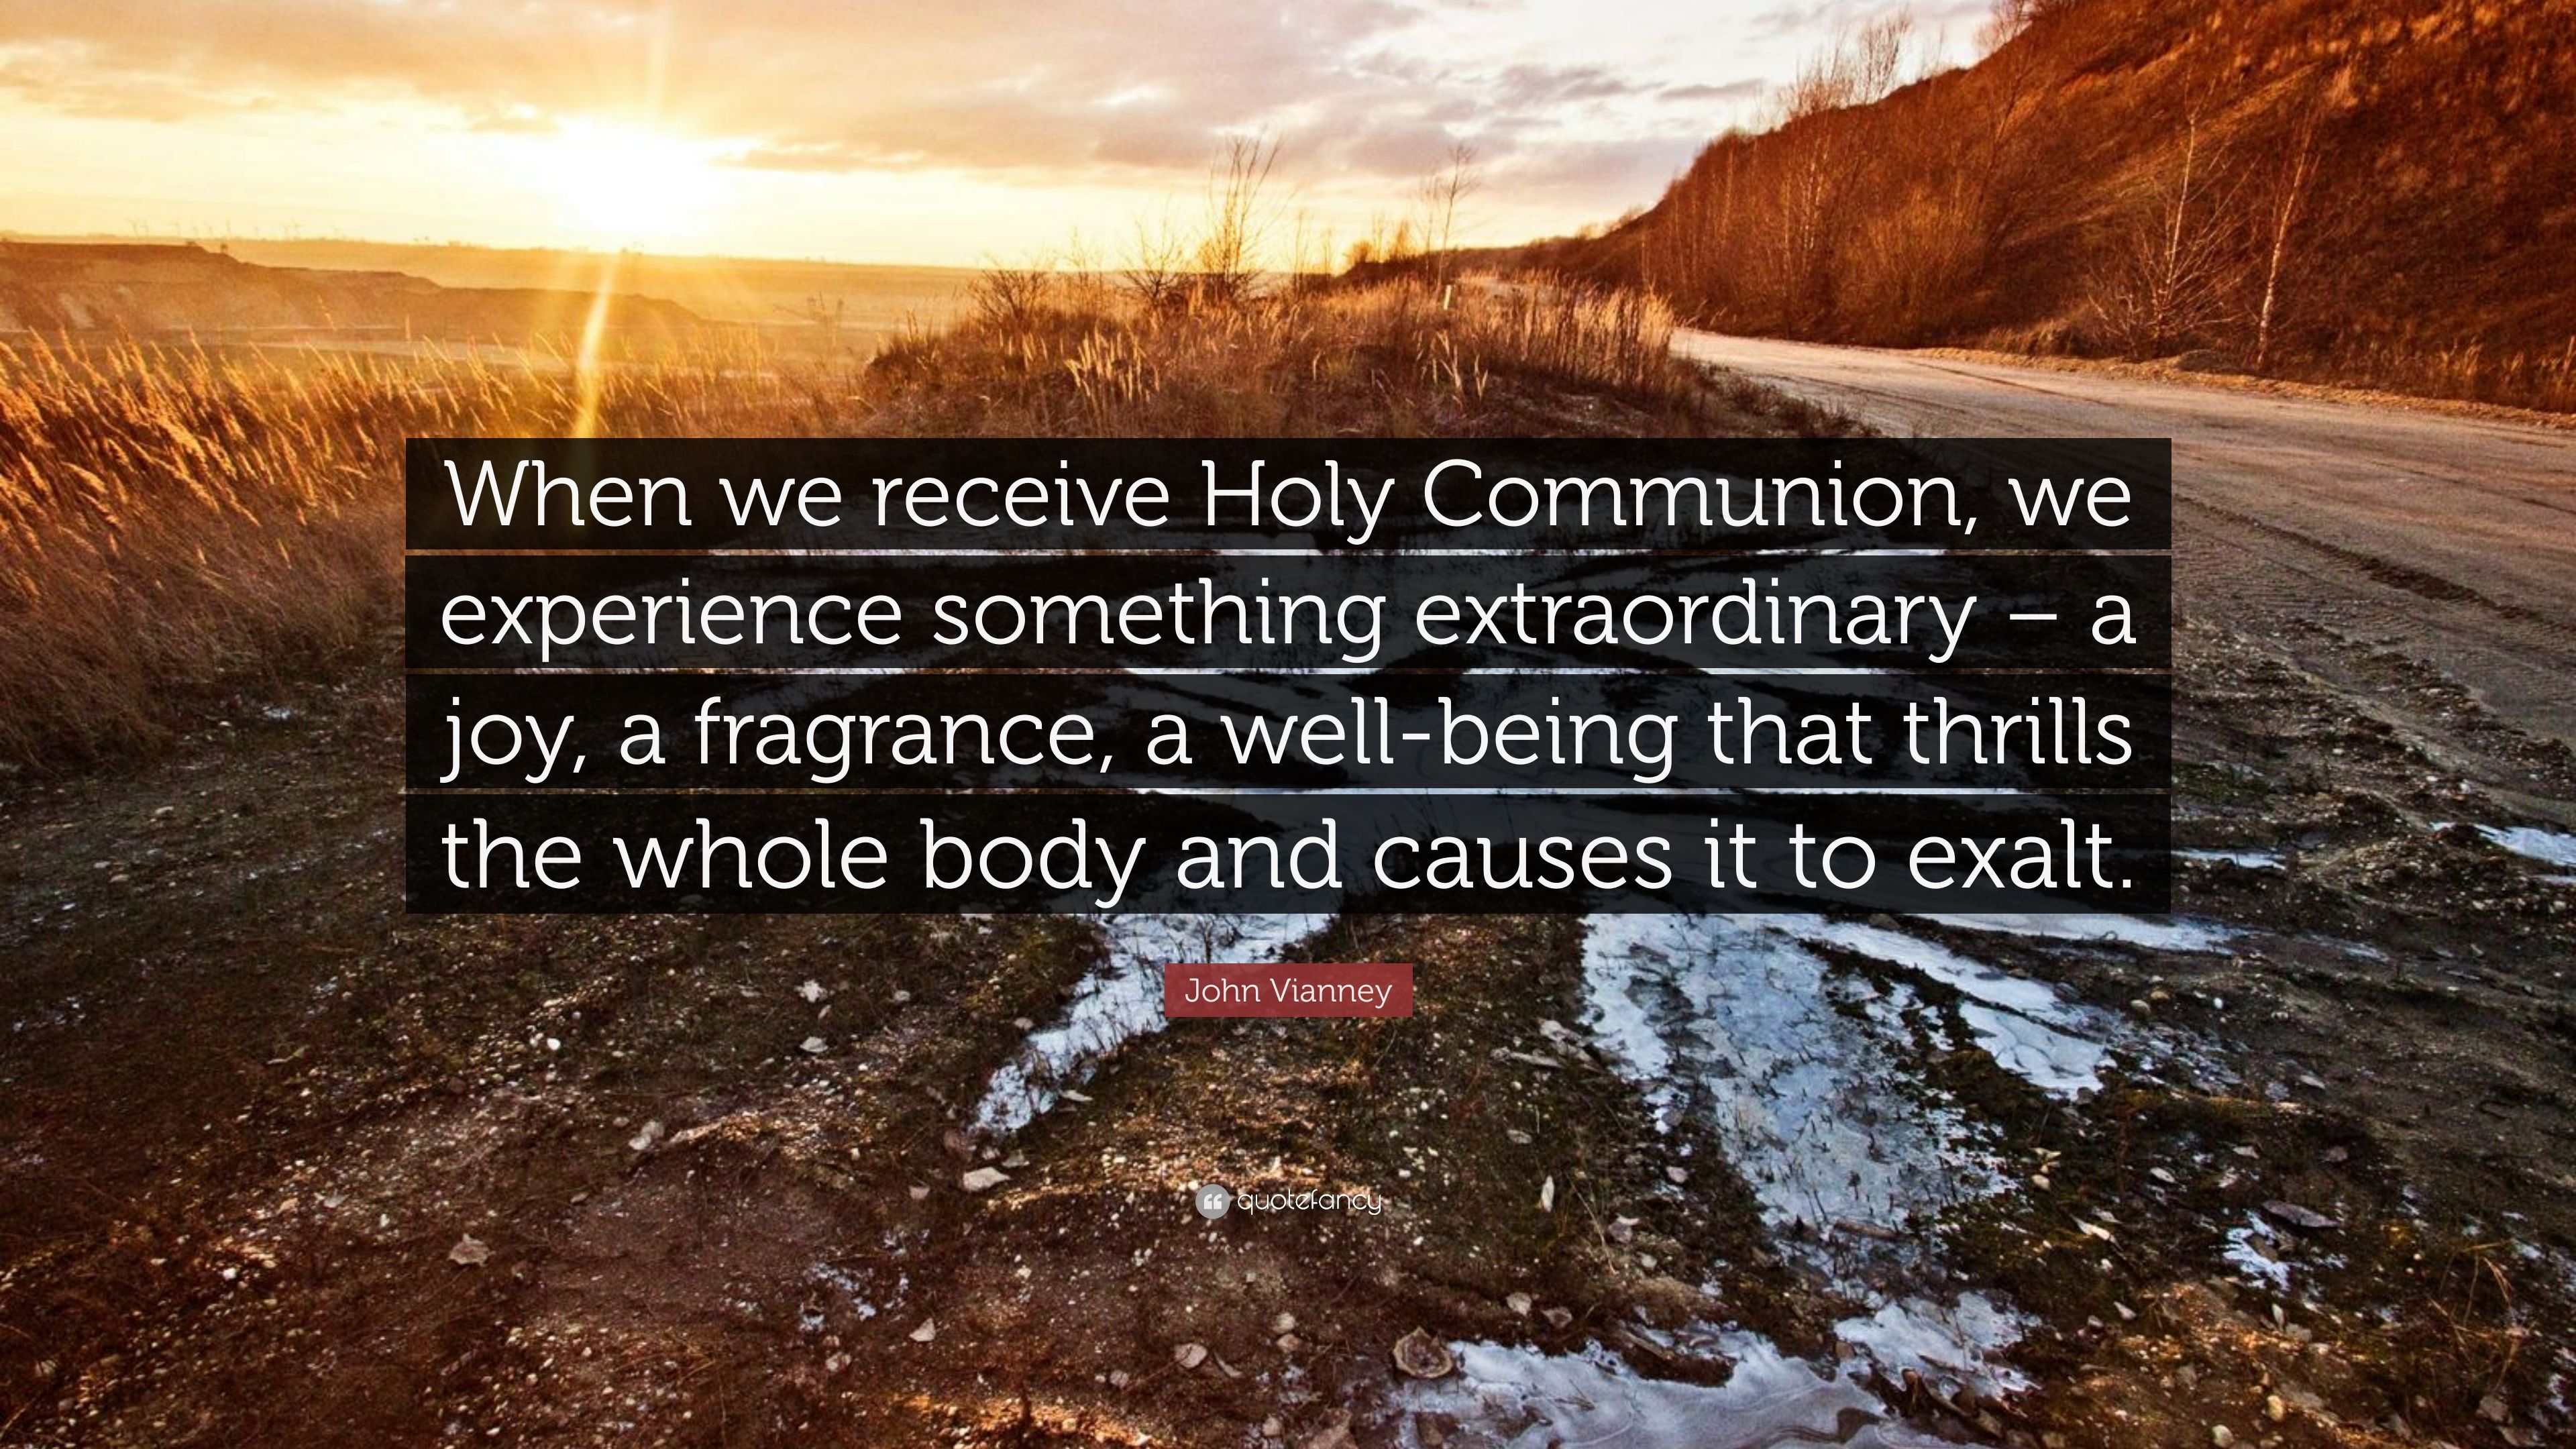 John Vianney Quote: “When we receive Holy Communion, we experience